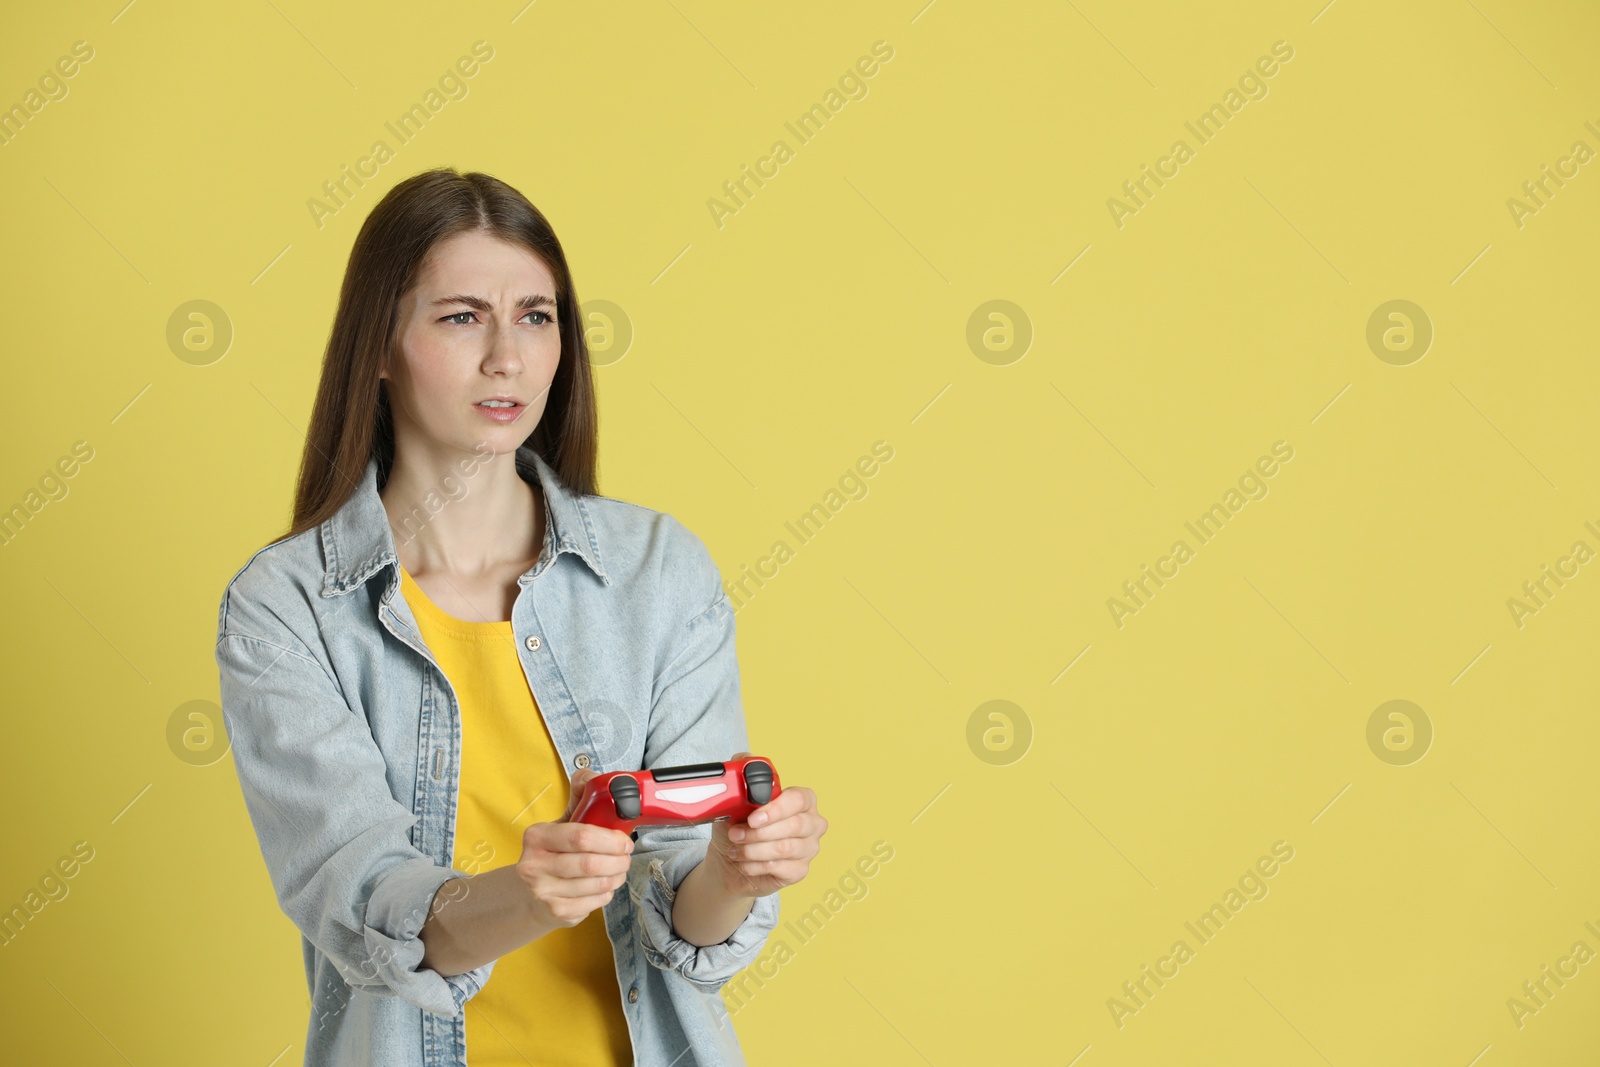 Photo of Woman playing video games with controller on yellow background, space for text